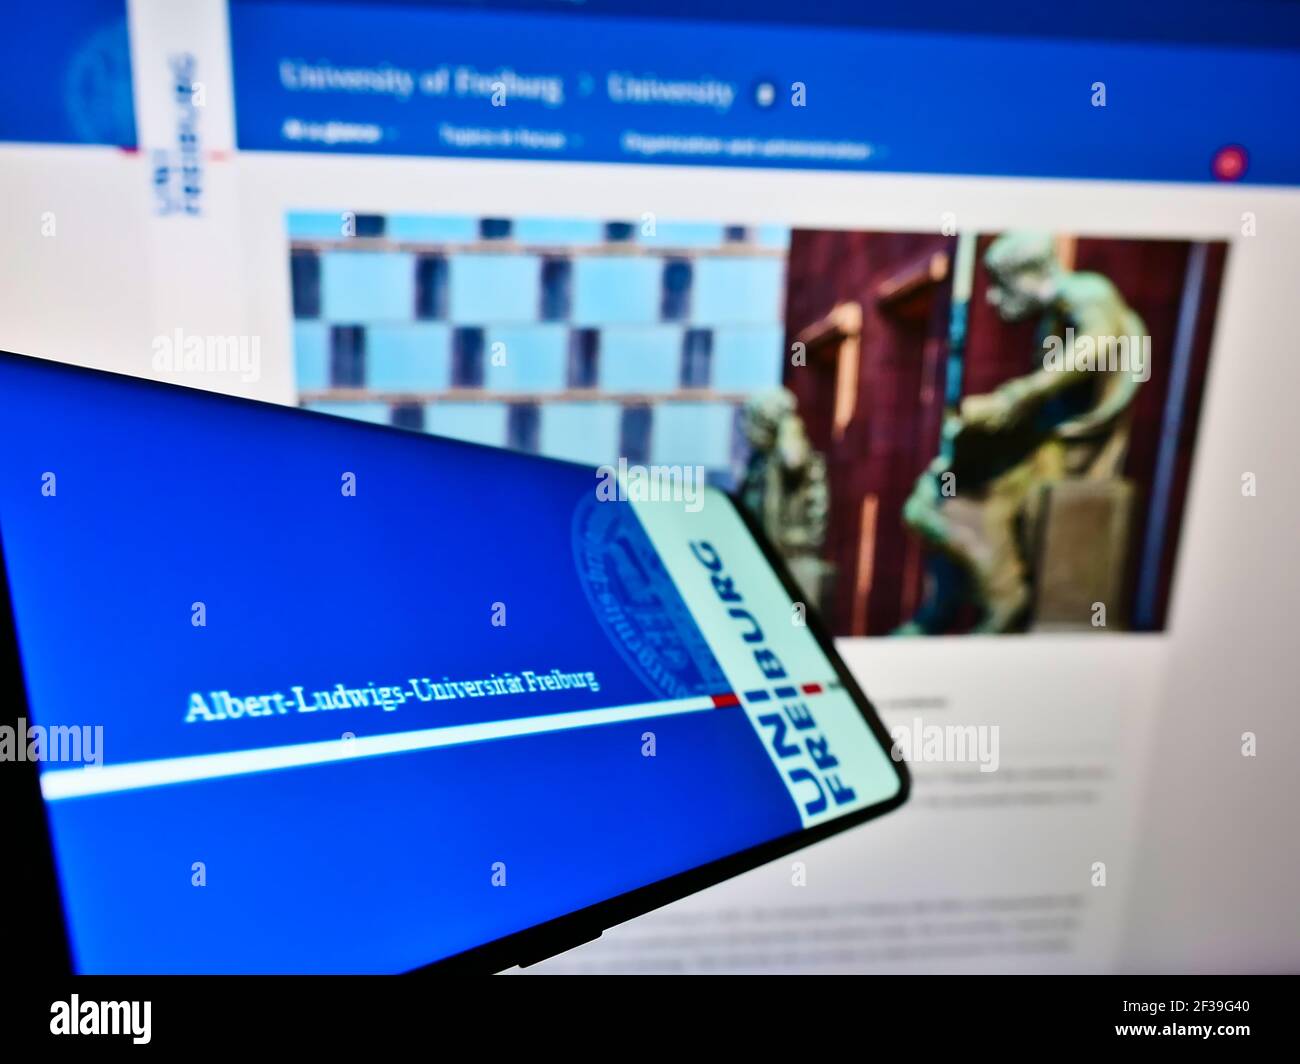 Cellphone with logo of German education institution University of Freiburg on screen in front of website. Focus on center-right of phone display. Stock Photo